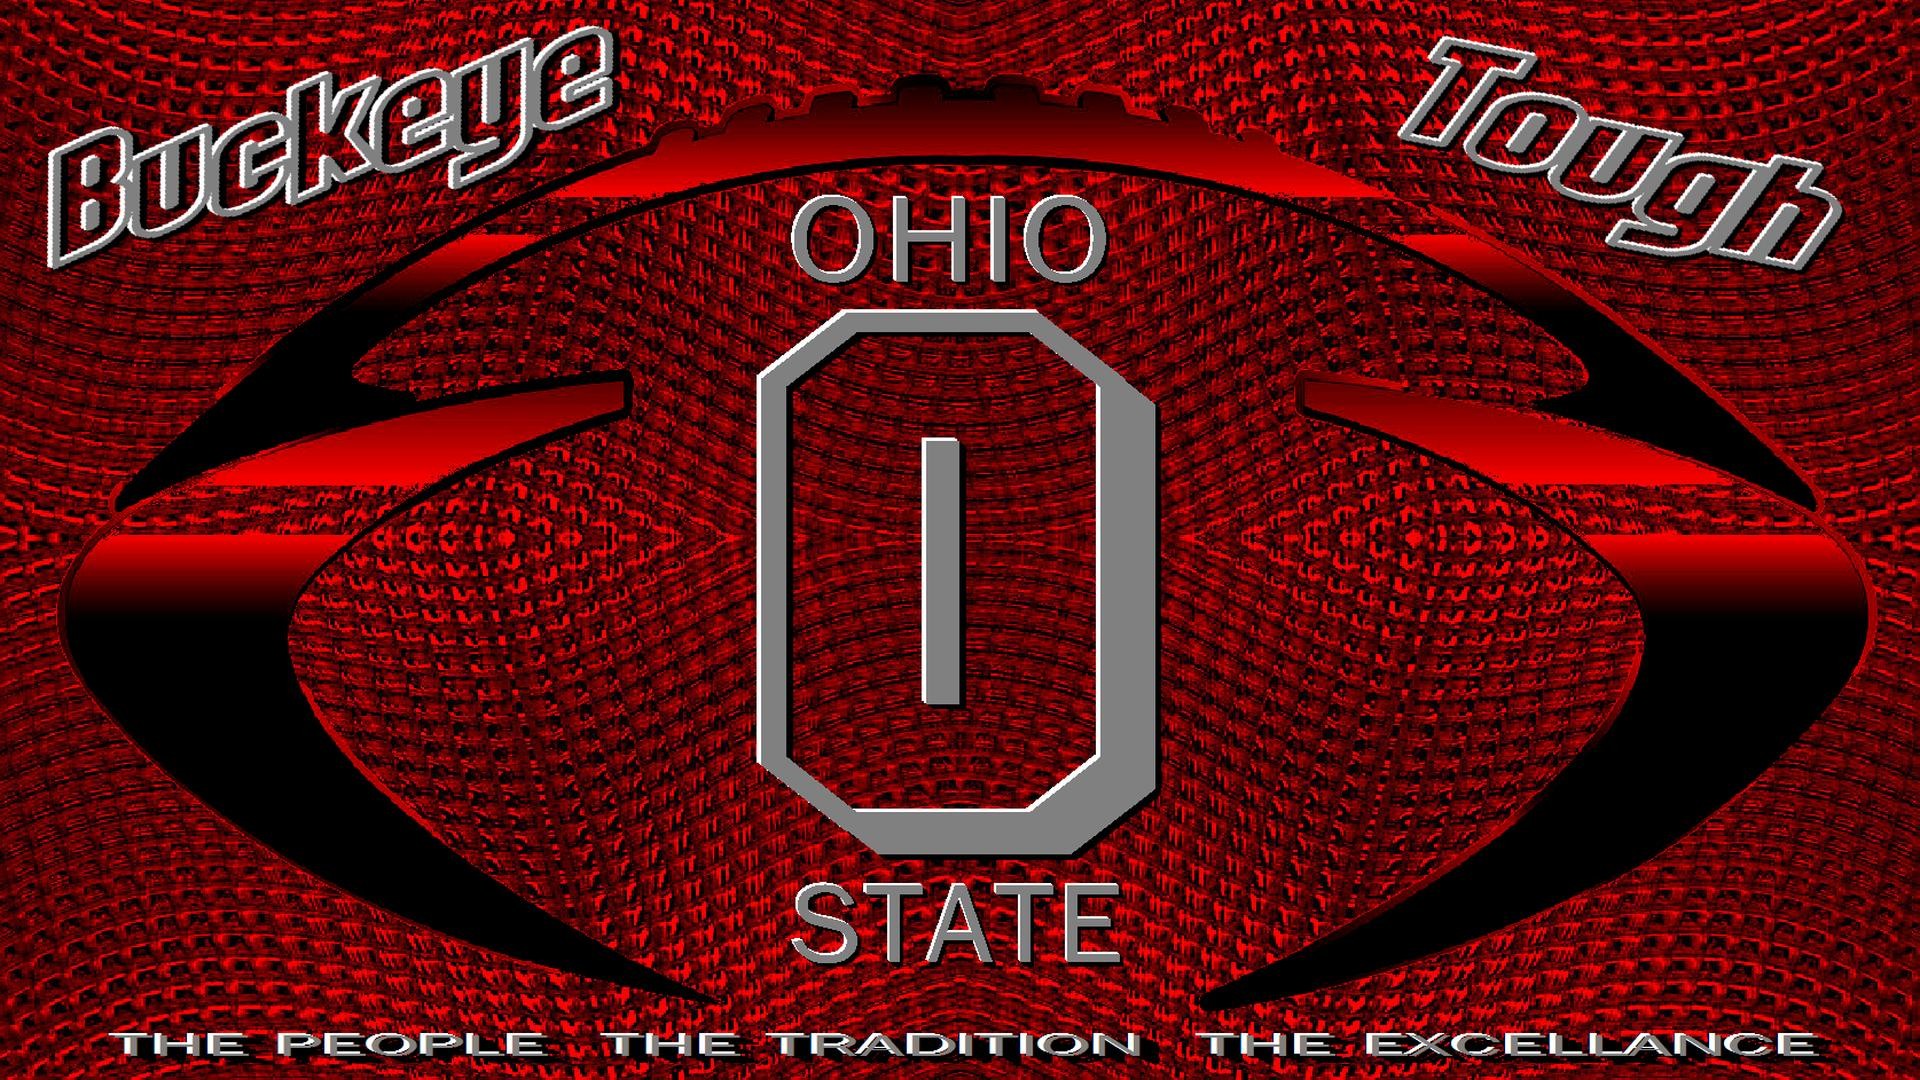 1920x1080 best images about OHIO STATE PHONE WALLPAPERS on Pinterest